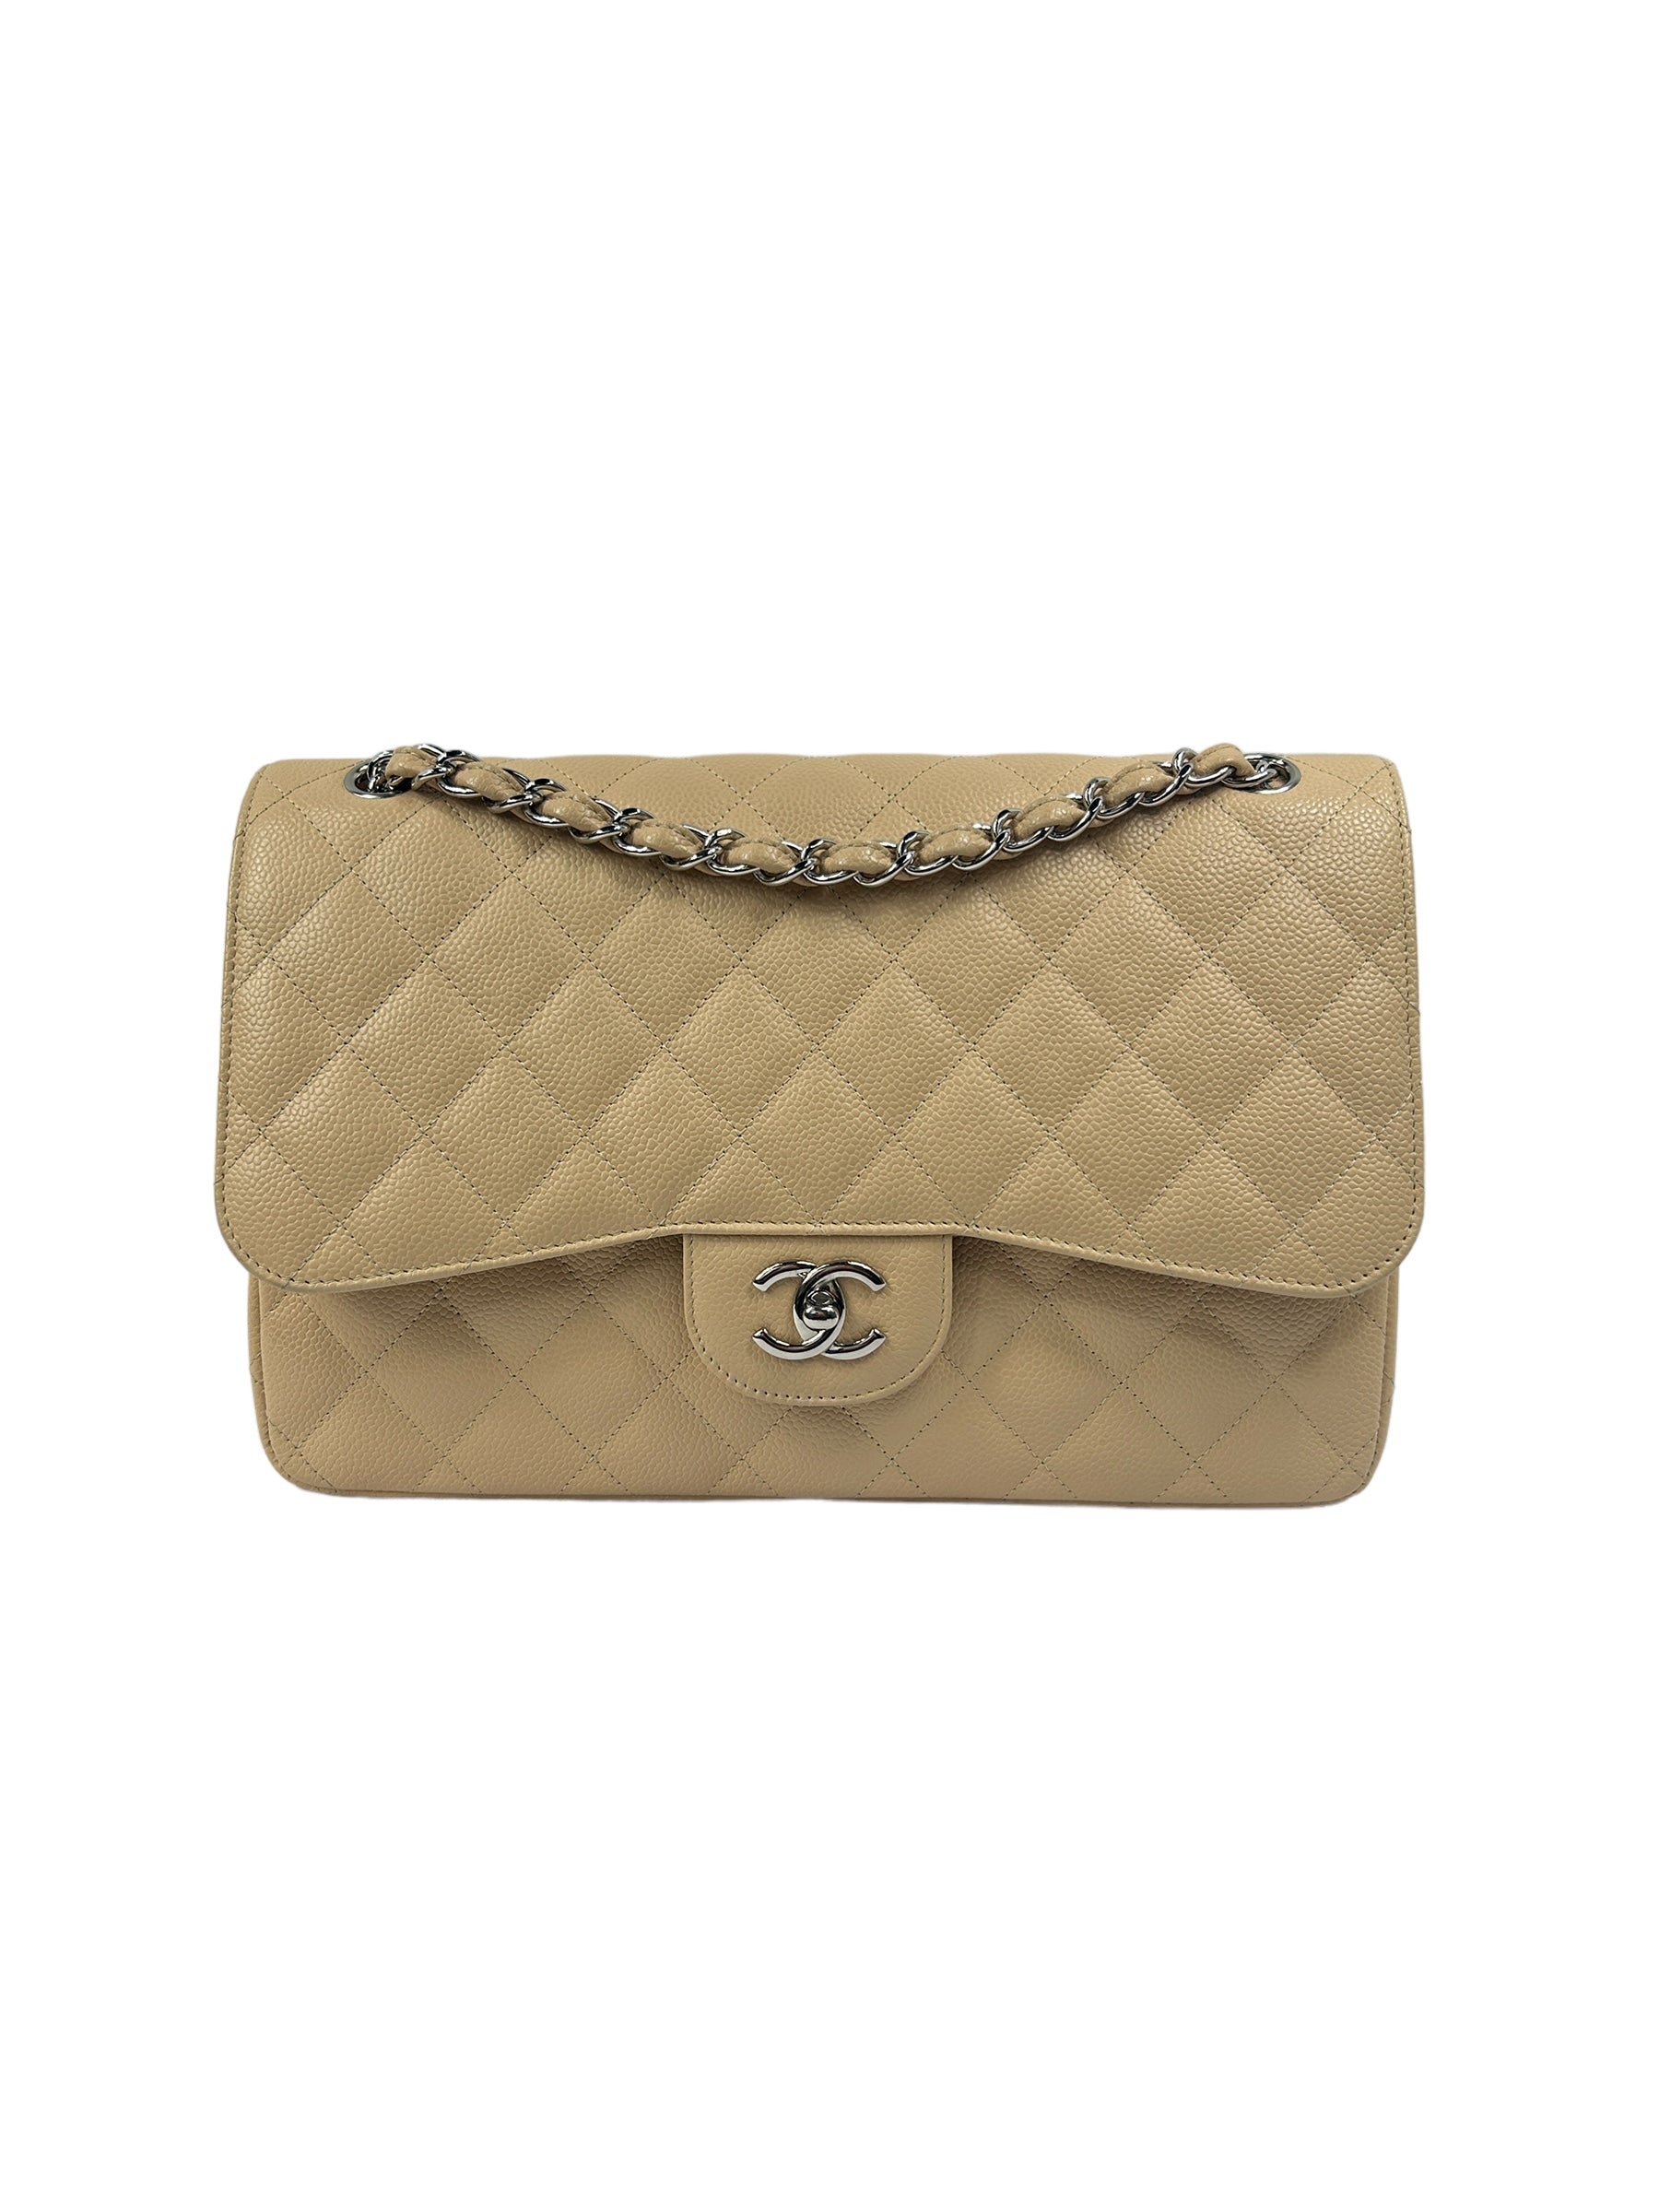 Nude Caviar Quilted Double Flap Jumbo w/SHW